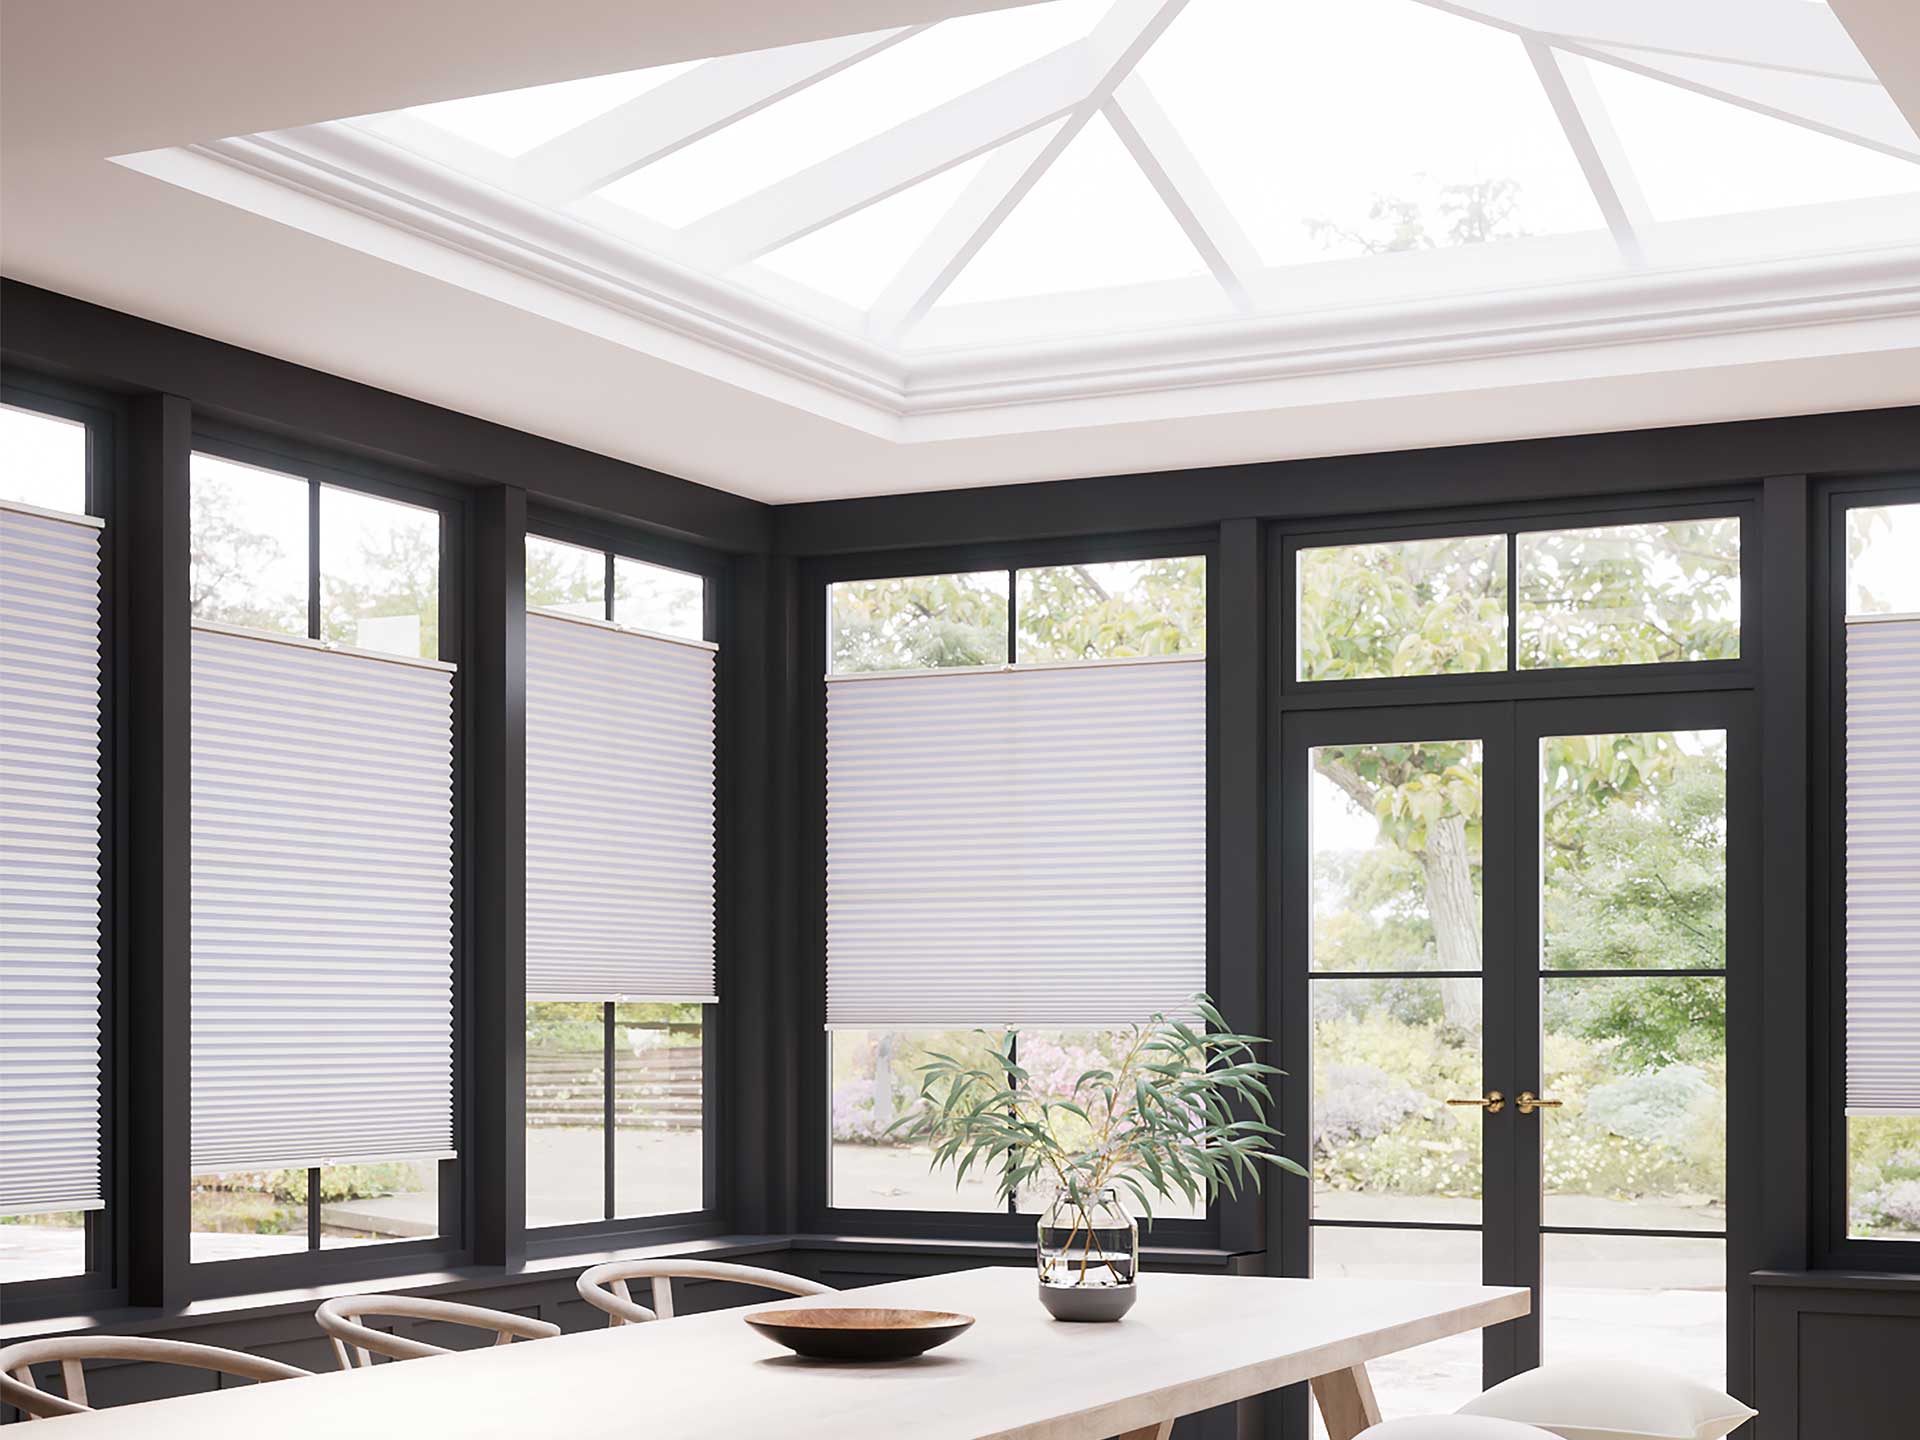 Getting the right blinds for your skylights and rooflights is key